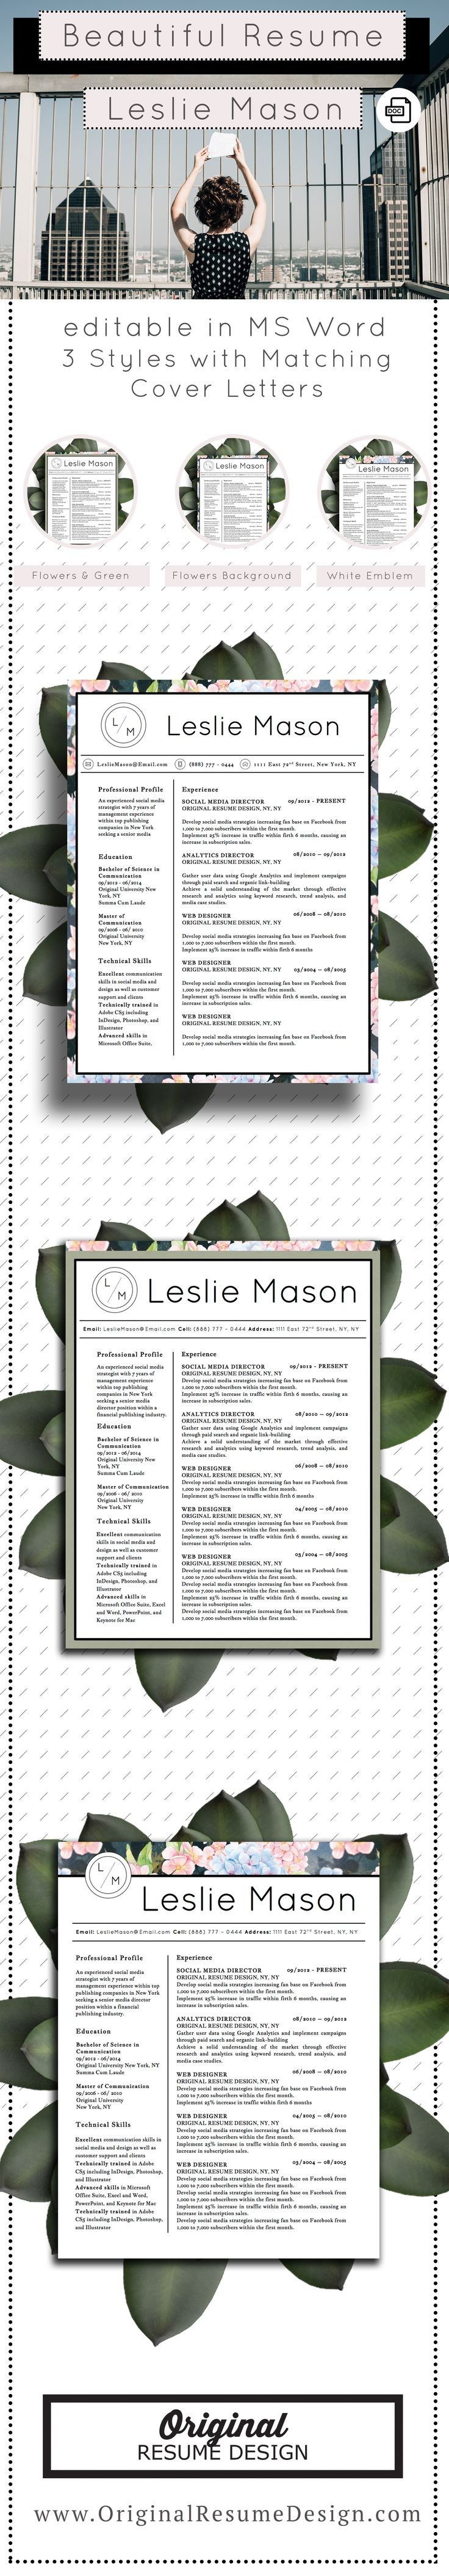 Beautiful resume template for Microsoft Word with...